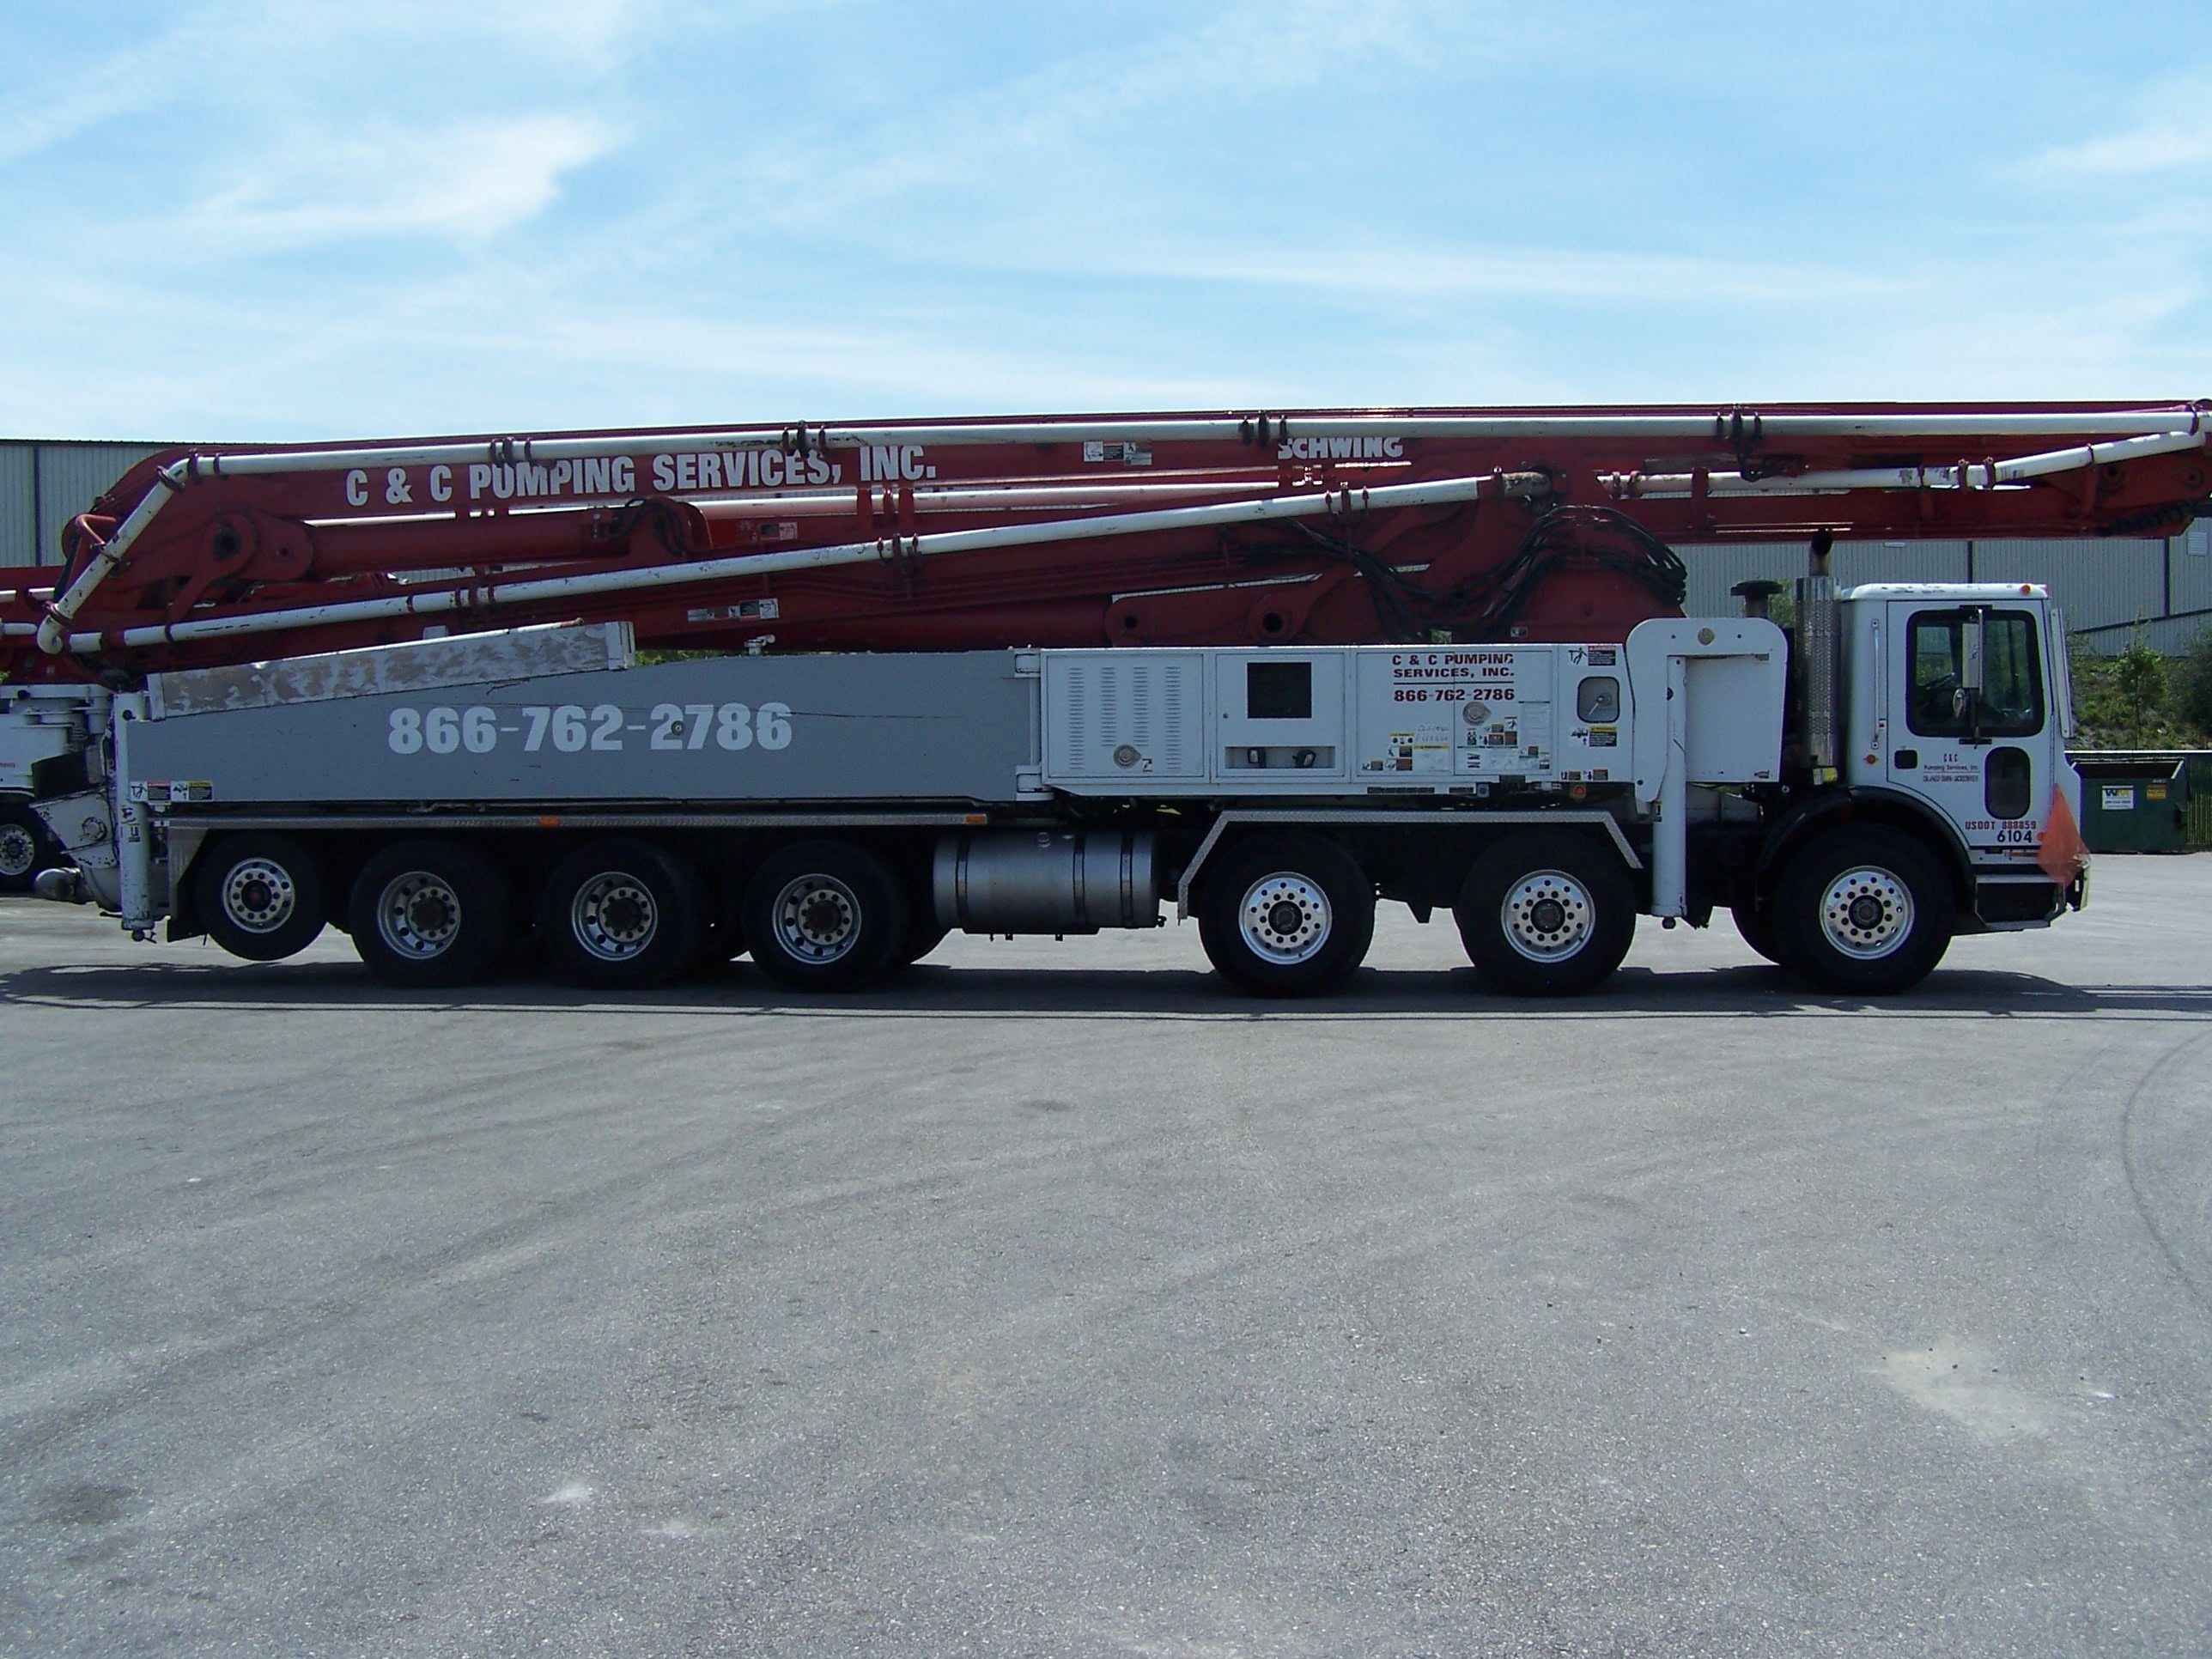 61 Meter concrete boom pump, provided by C&C Pumping Services Inc. 